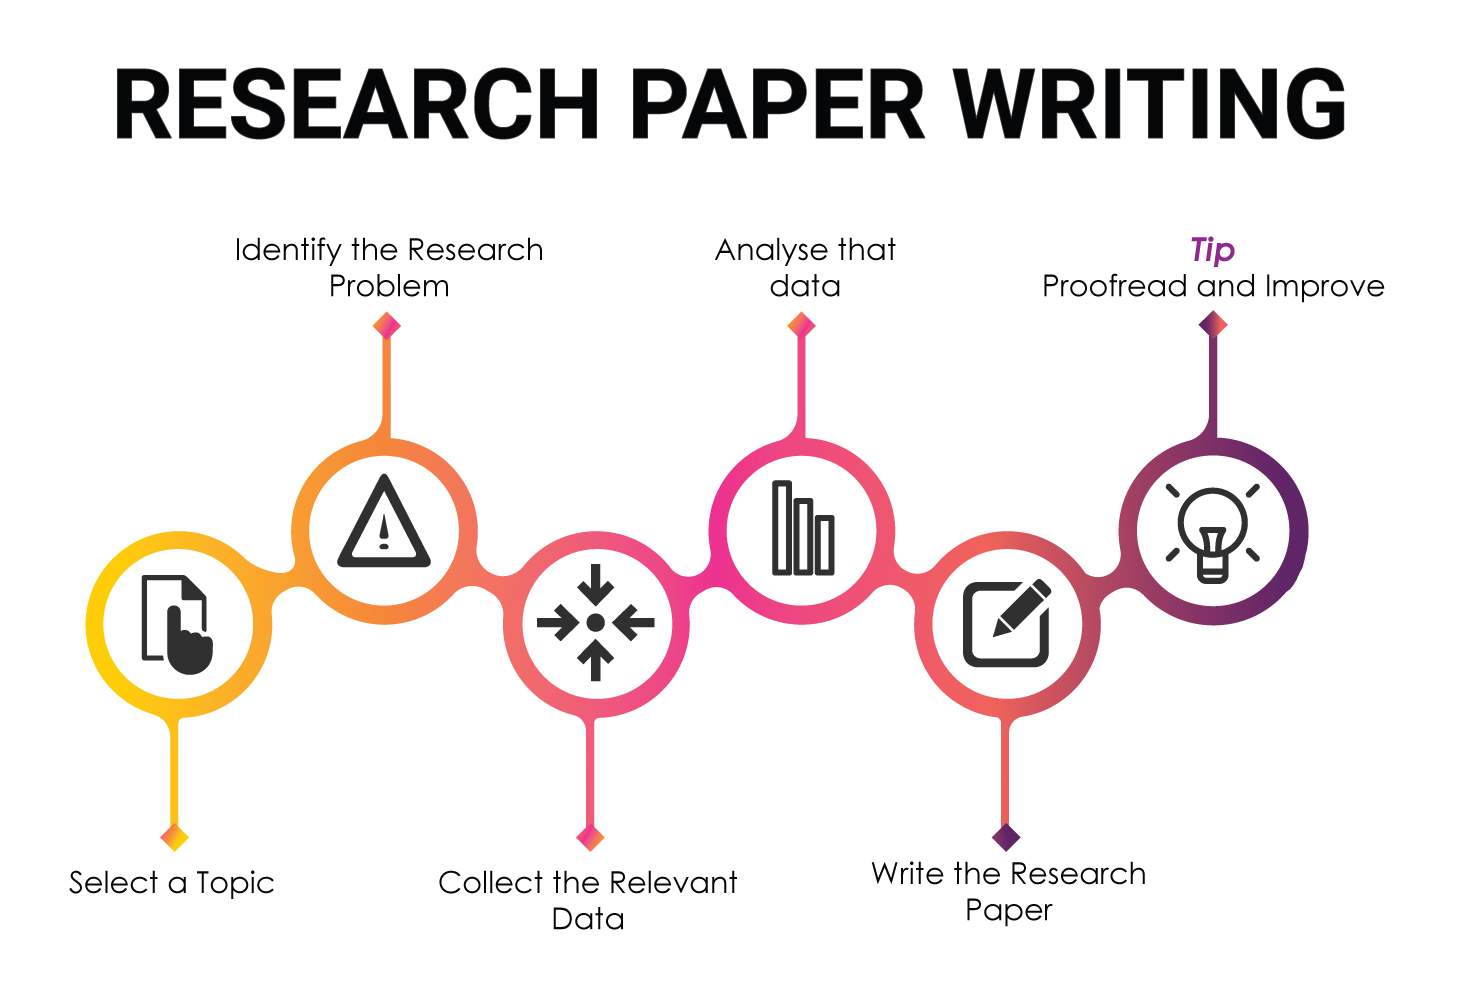 steps of writing research paper